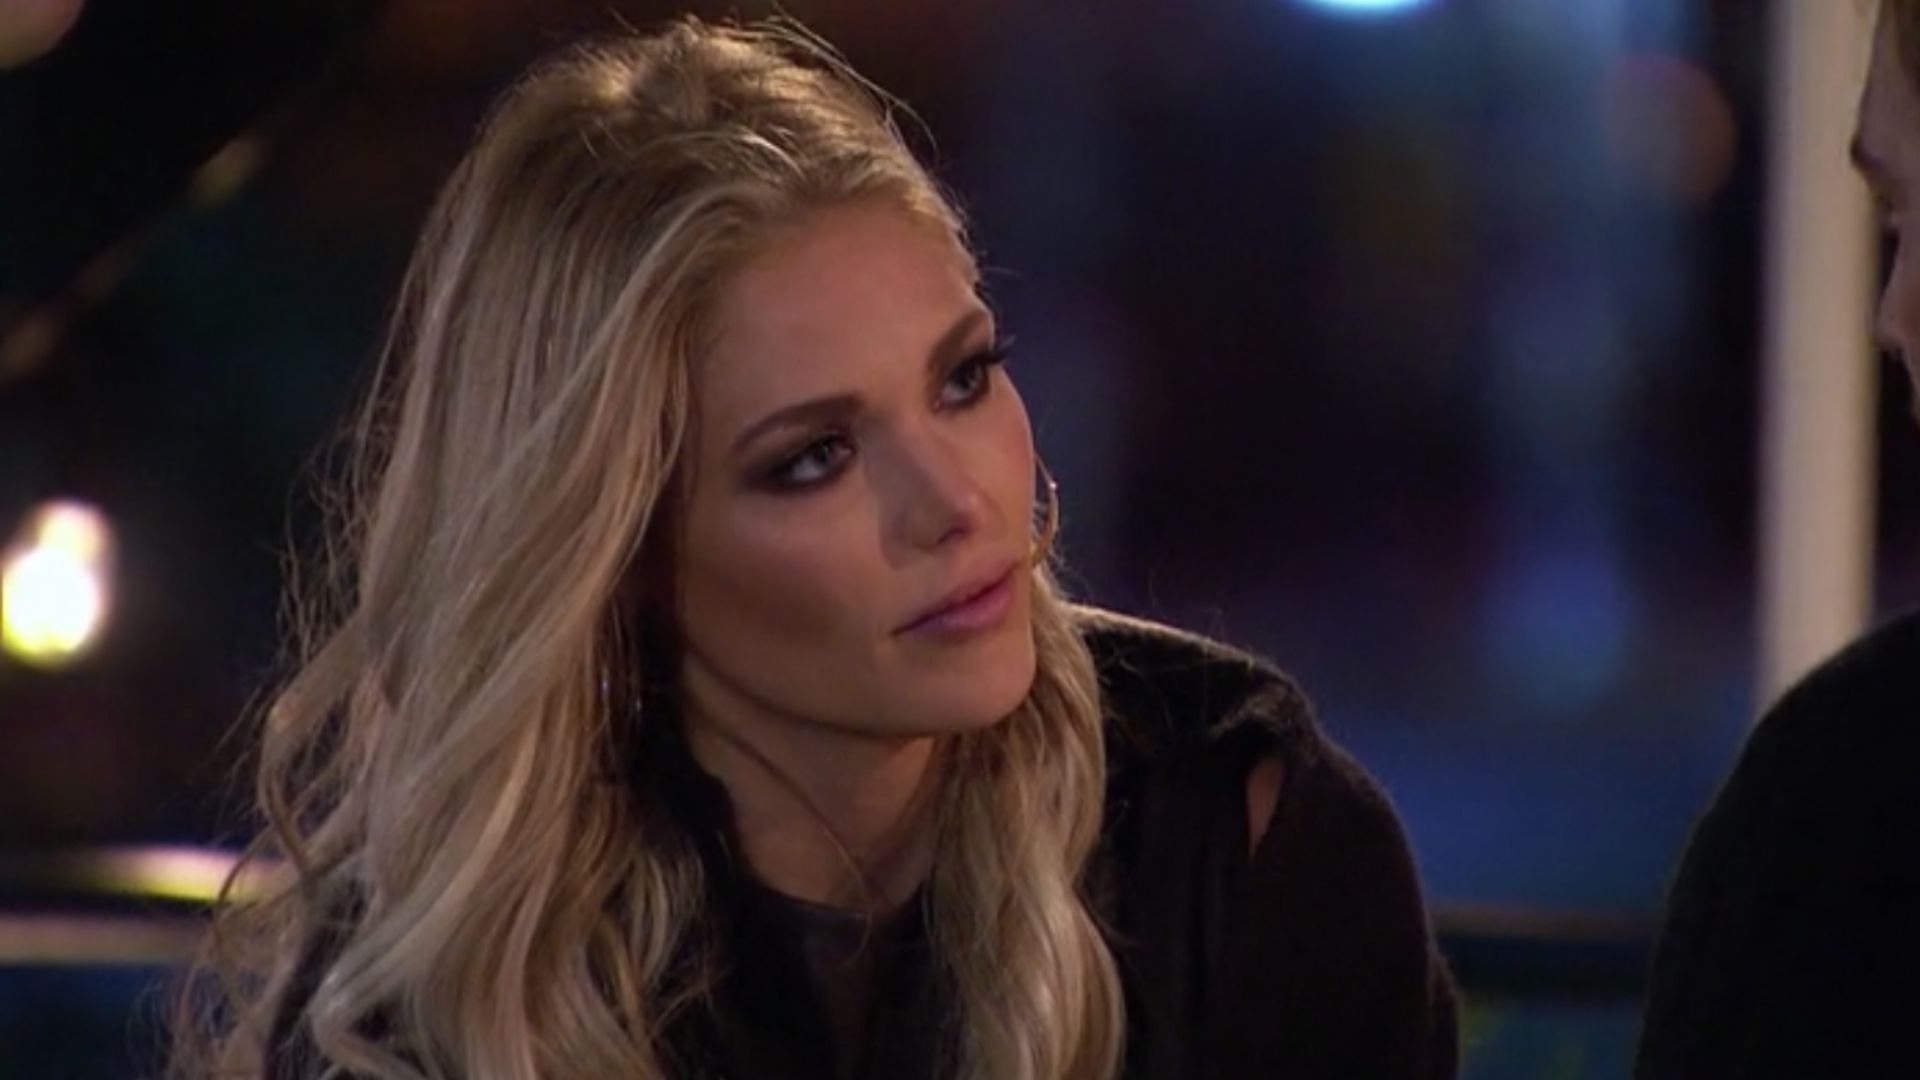 This New 'Bachelor' Clip Proves Kelsey Is the Villain of Peter